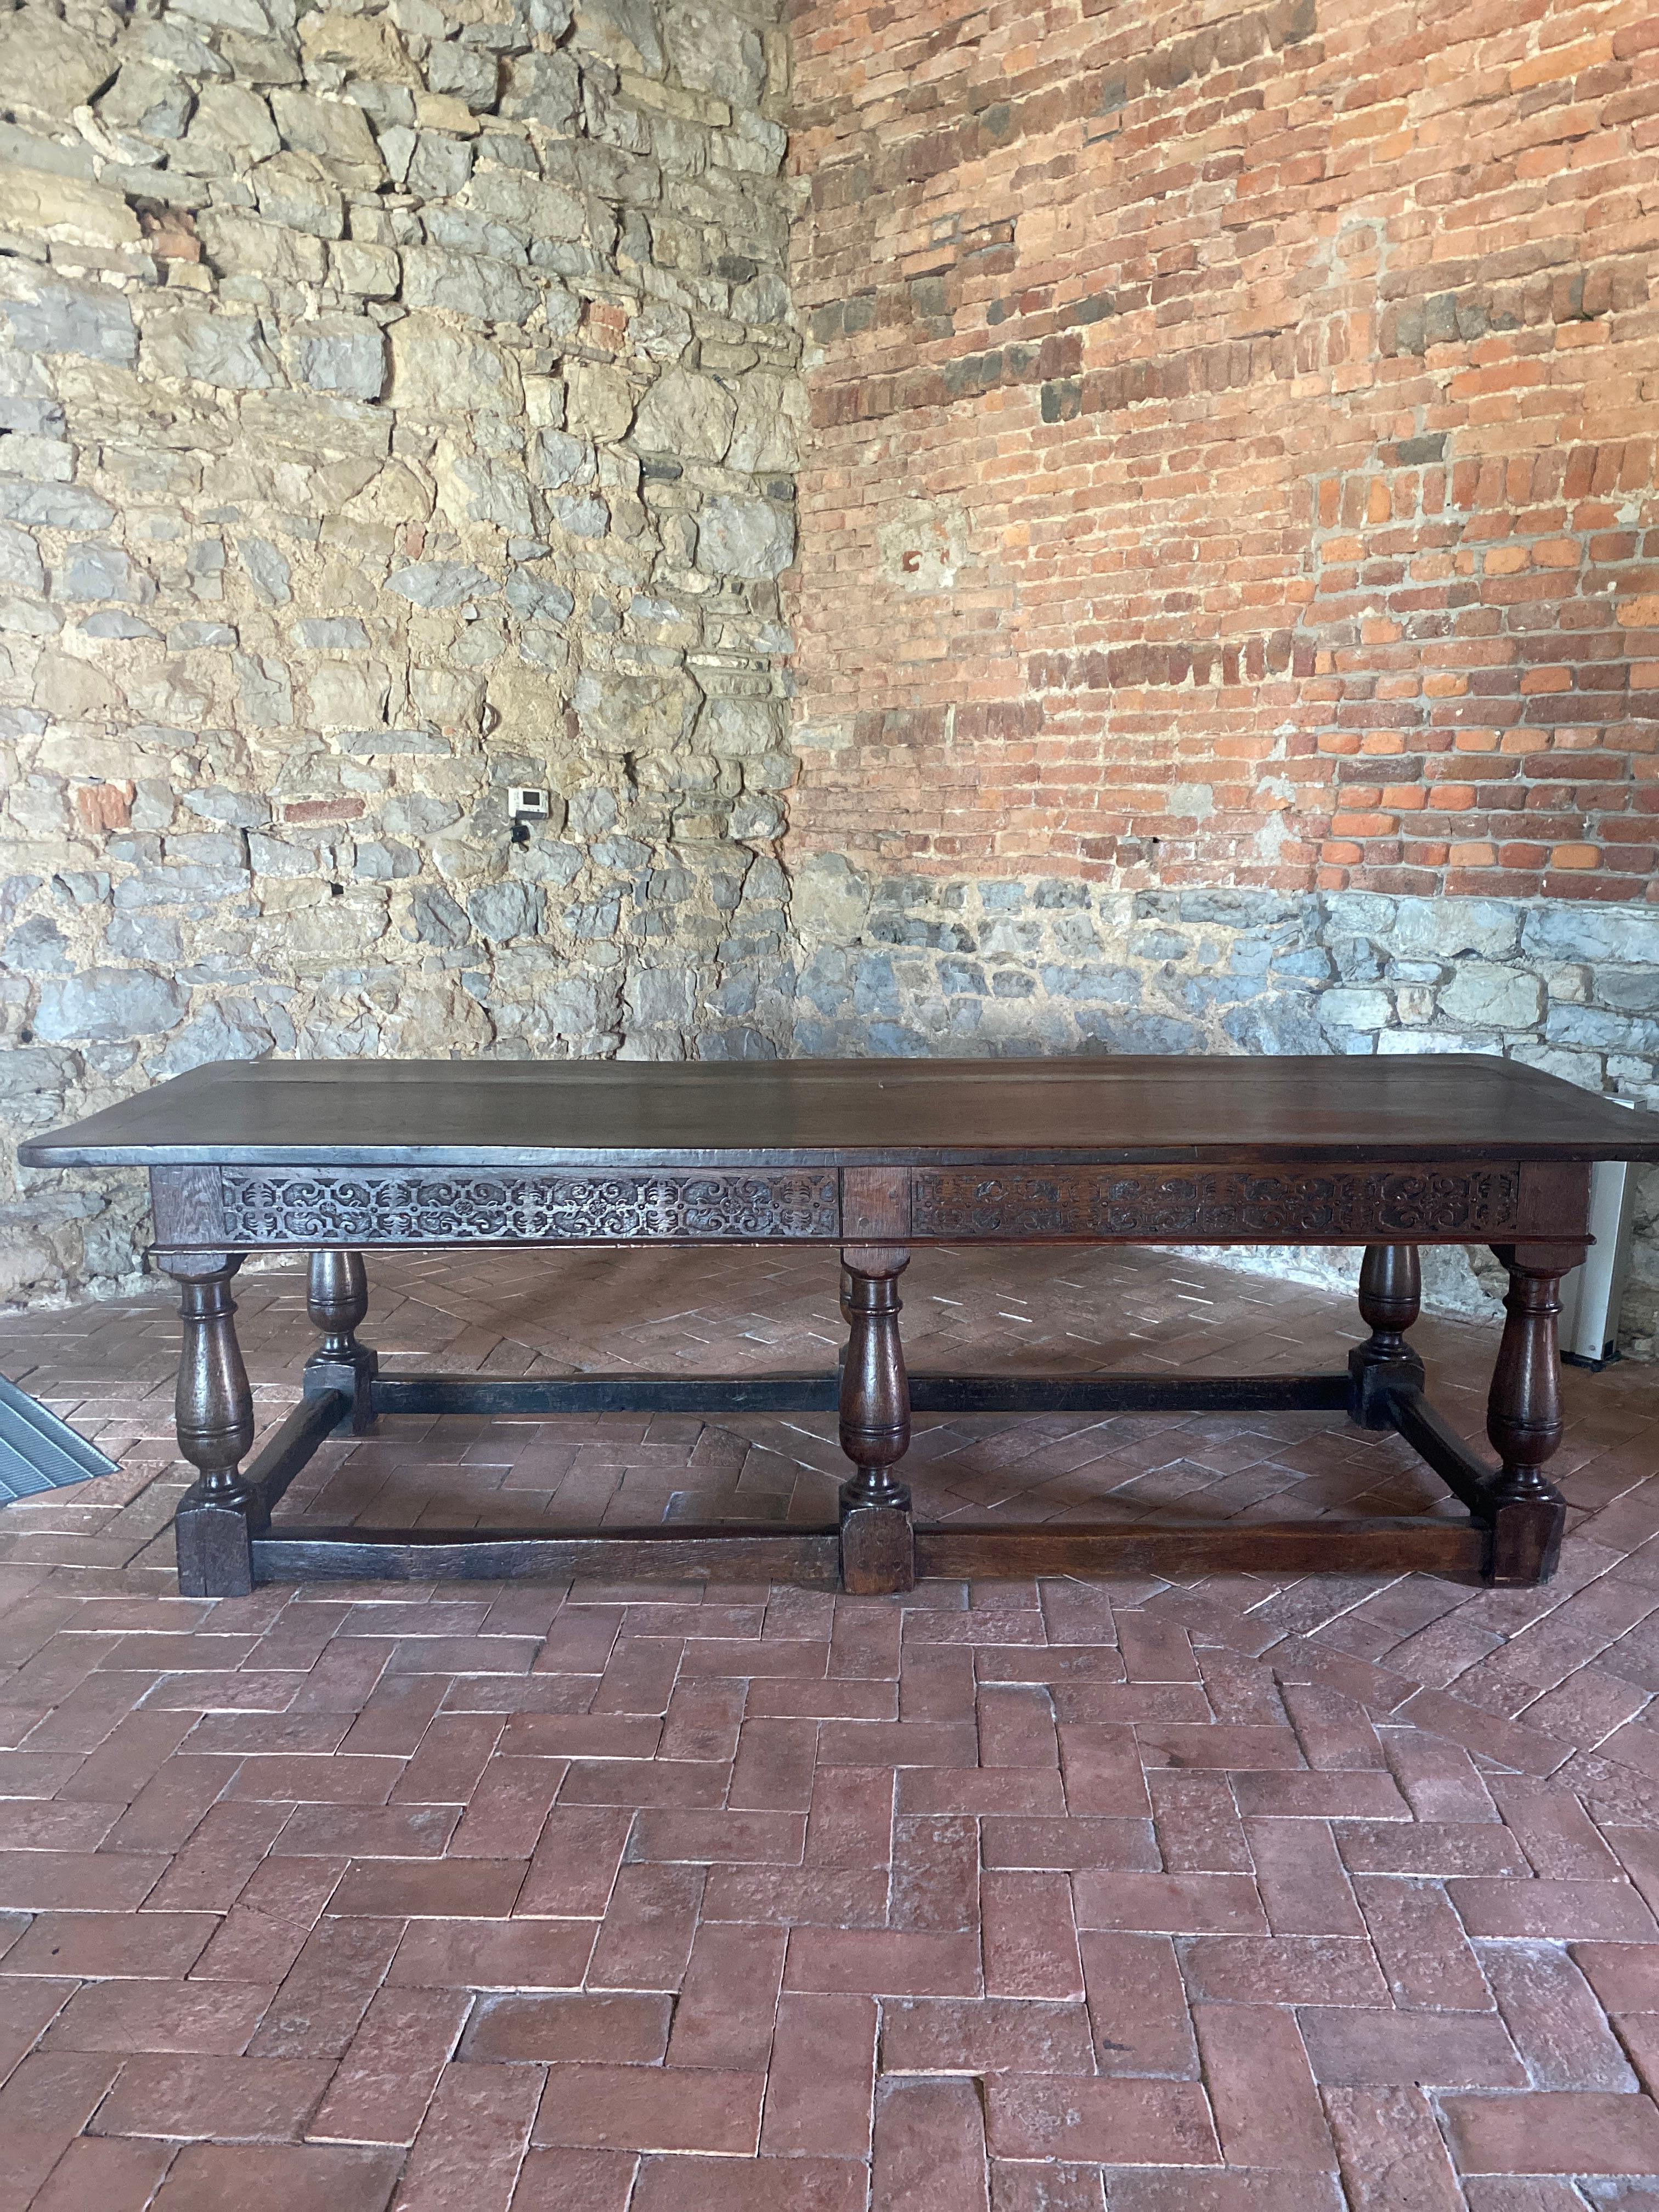 magnificent large carved console table from the 19th century English Renaissance in oak, carving work in the crosspieces, 6 large legs with a spacer at the bottom very nice patina with ideal properties in perfect state of conservation.